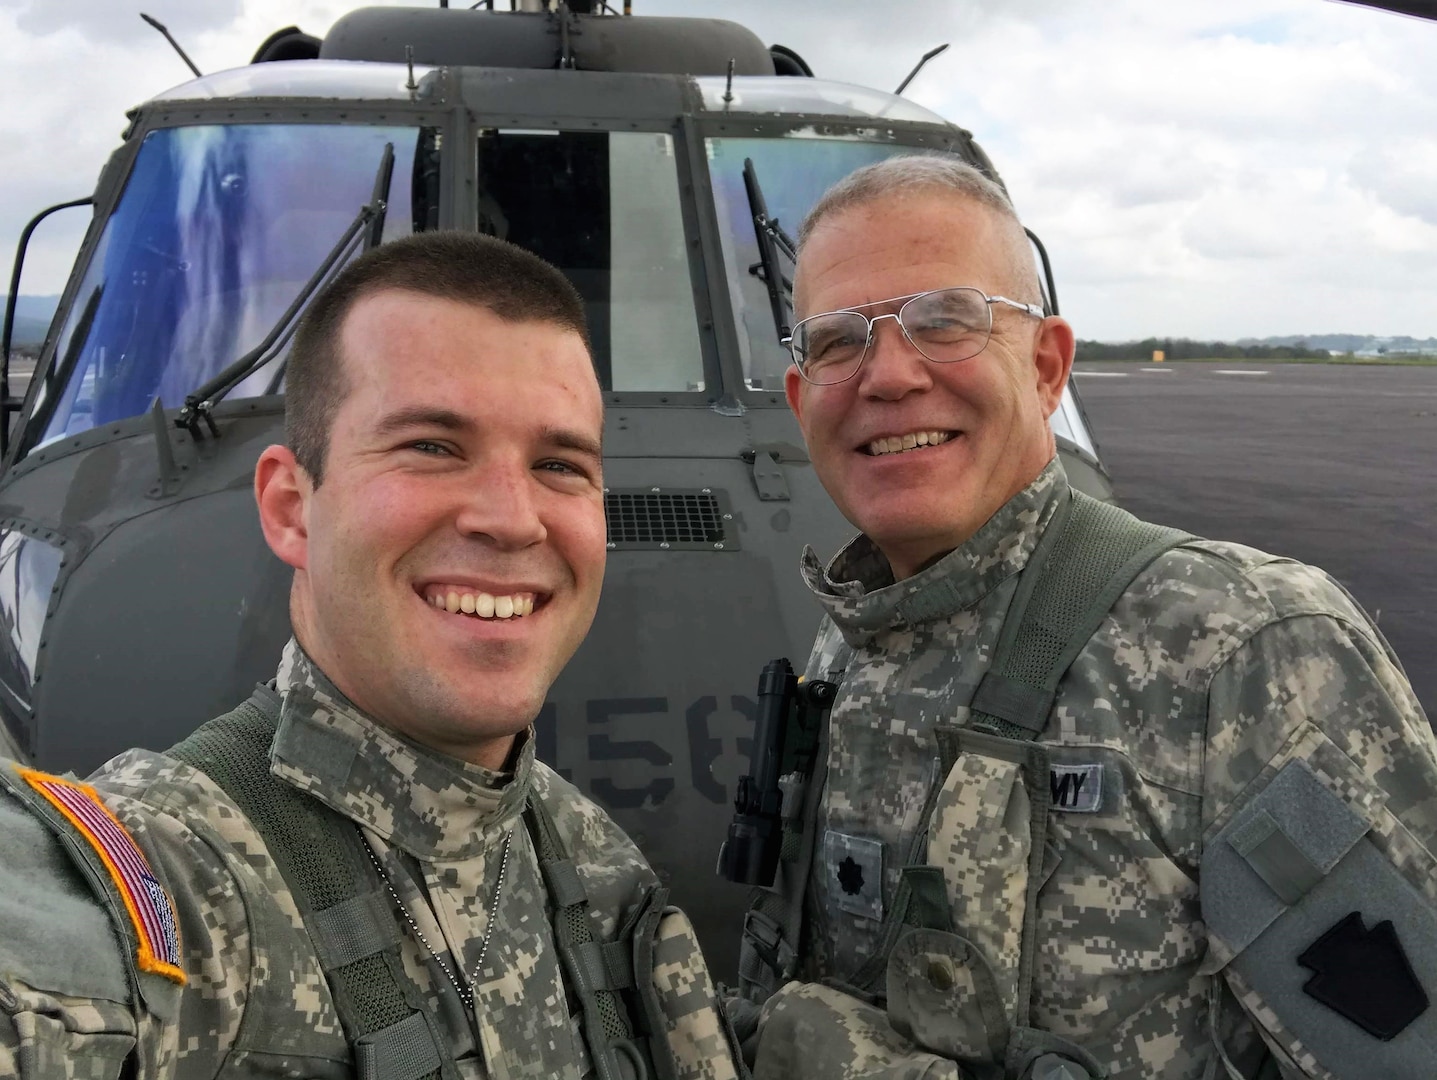 U.S. Army 1st Lt. Ian Lloyd, left, and Col. Howard Lloyd, both with the 28th Expeditionary Combat Aviation Brigade, pose in front of a UH-60 Black Hawk helicopter at Muir Army Airfield, October 9, 2018.